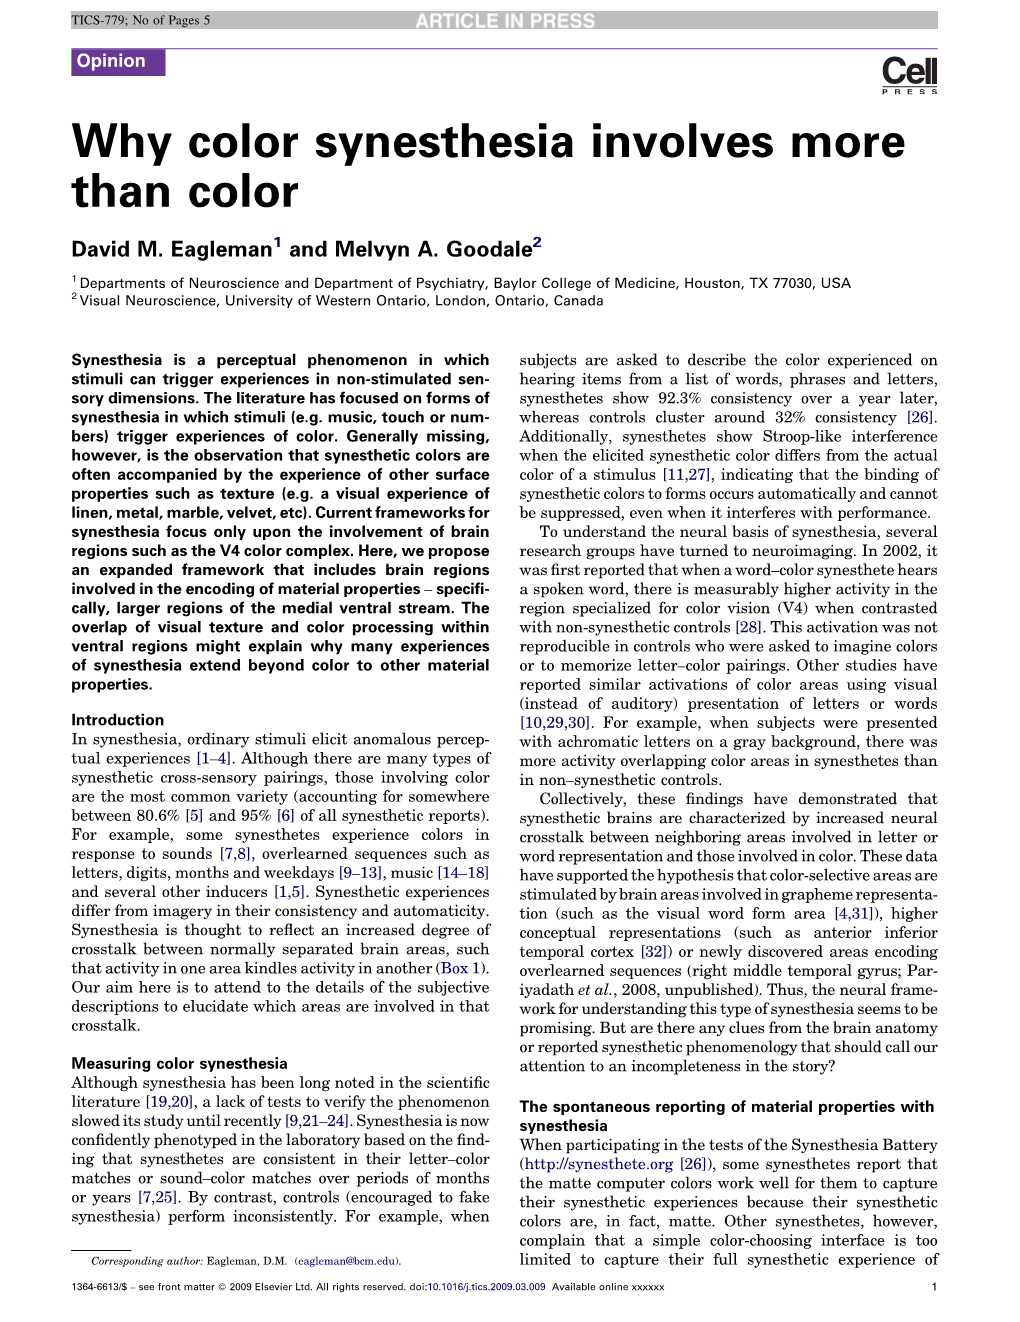 Why Color Synesthesia Involves More Than Color